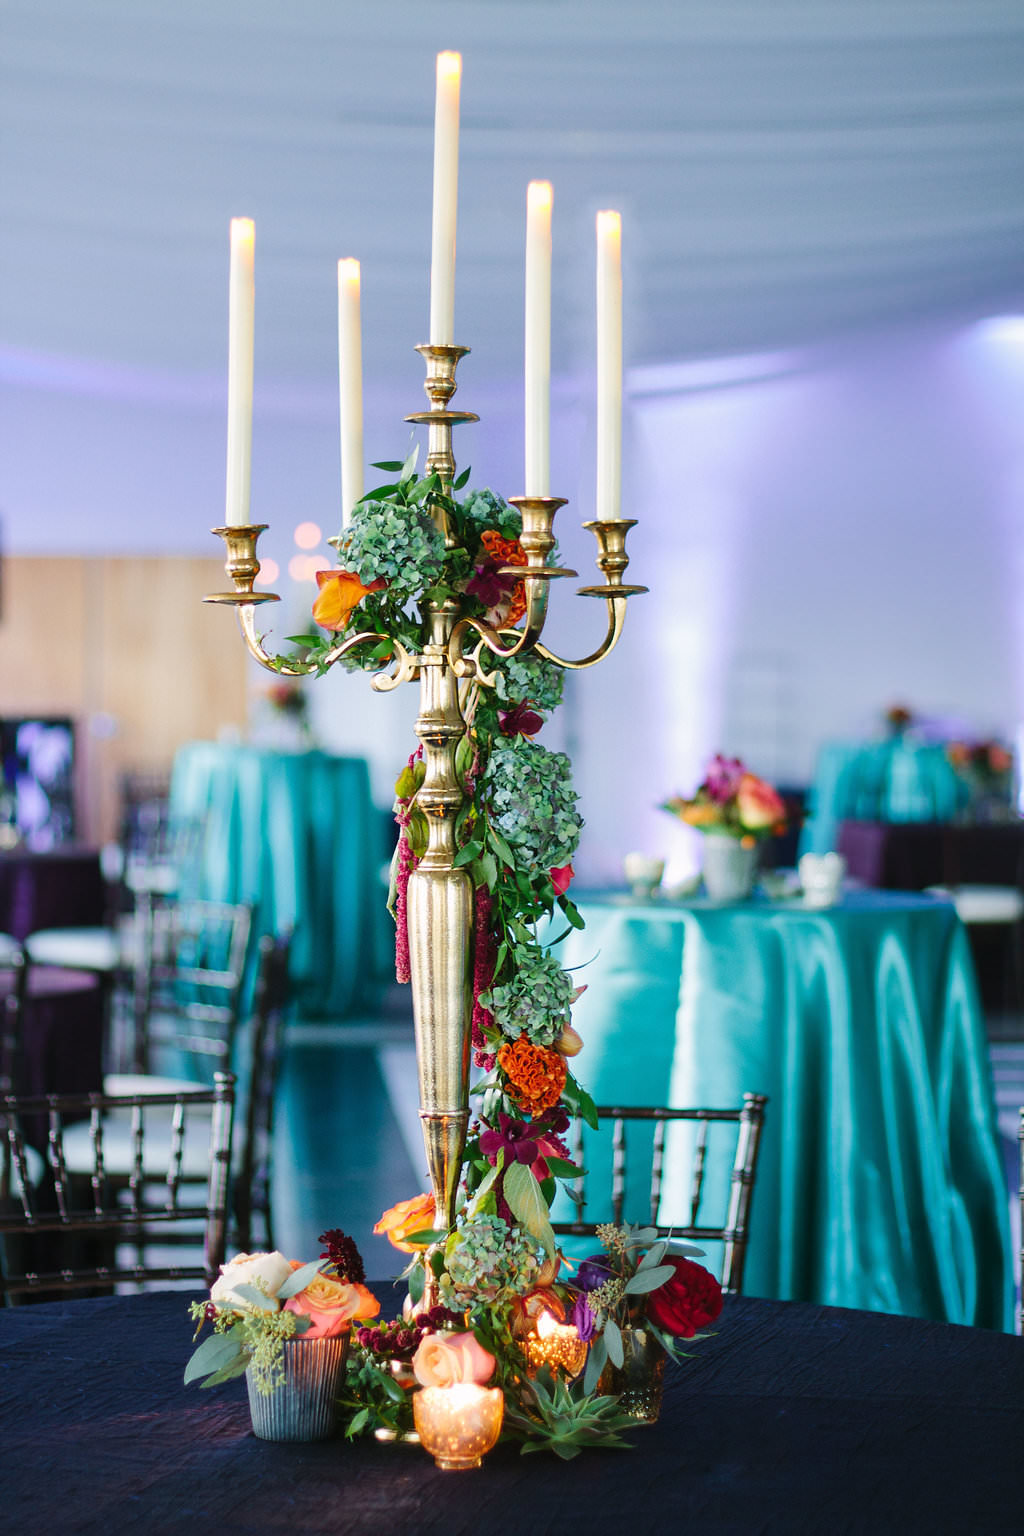 Jewel Tone Whimsical Wedding Reception Decor with Tall Gold Candelabra with Hanging Red, Purple, and Yellow Florals with Greenery, and Midnight Blue and Emerald Green Linens | Tampa Bay Wedding Planner Special Moments Events Planning | Clearwater Wedding Rentals Over The Top Linens